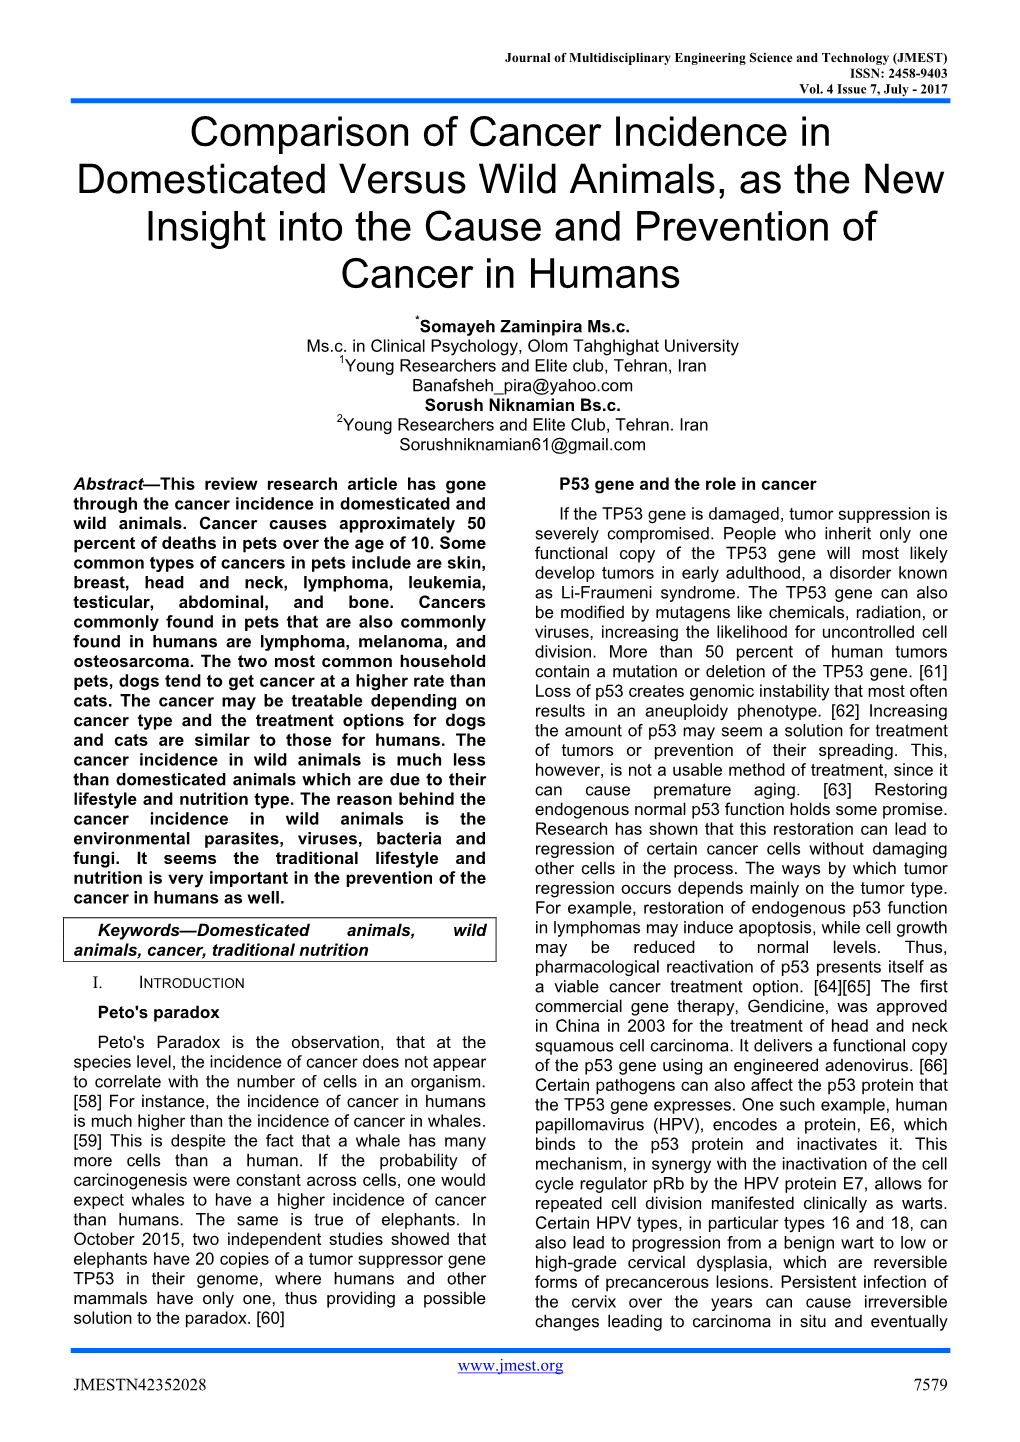 Comparison of Cancer Incidence in Domesticated Versus Wild Animals, As the New Insight Into the Cause and Prevention of Cancer in Humans